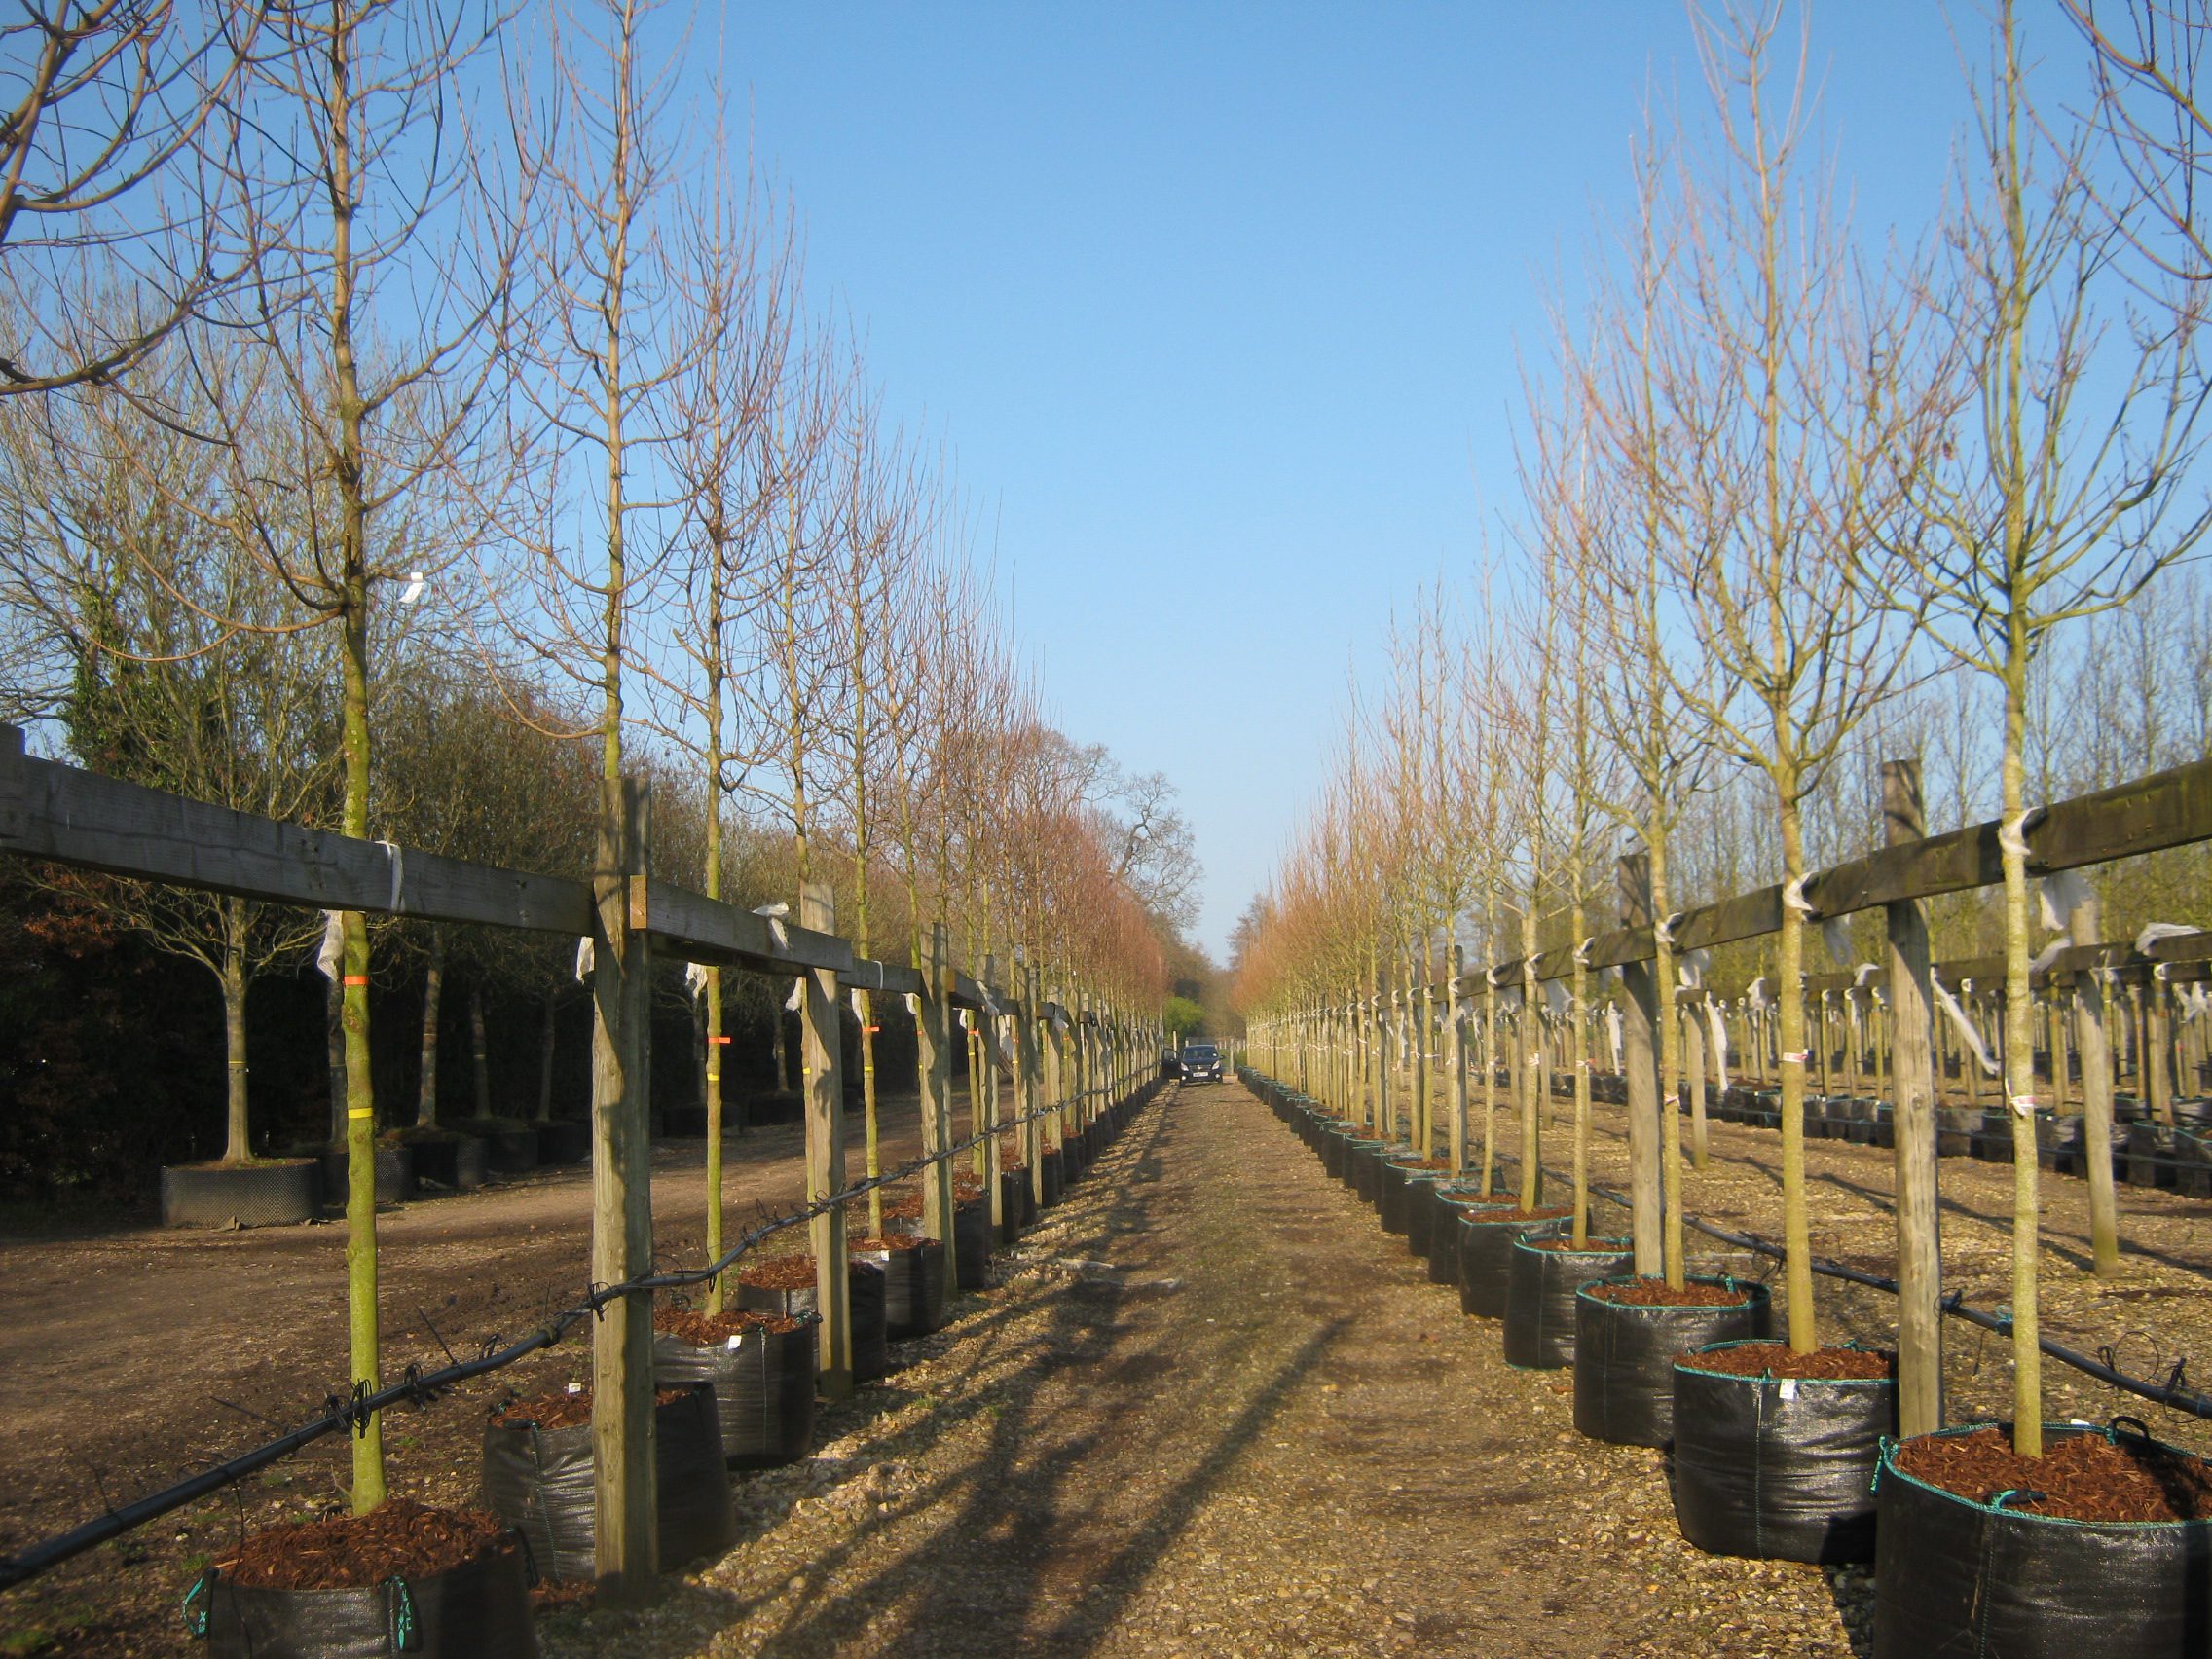 Acer campestre Elsrijk trees container grown in rows in winter